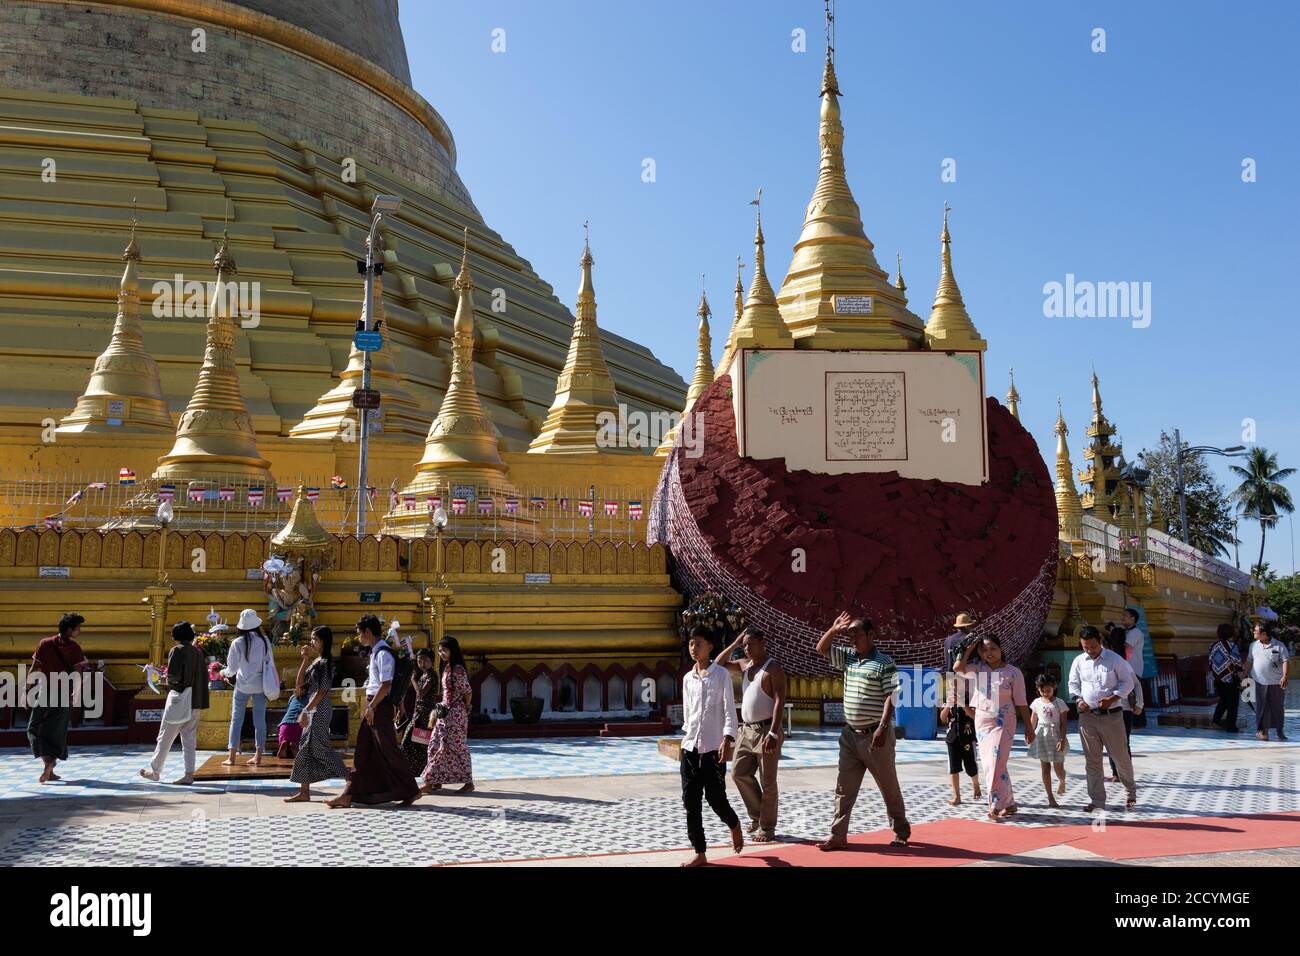 Interior of Shwemawdaw buddhist temple. The highest pagoda in Myanmar, destroyed in the past by several earthquakes and rebuilt. Bago - Pegu, Myanmar Stock Photo